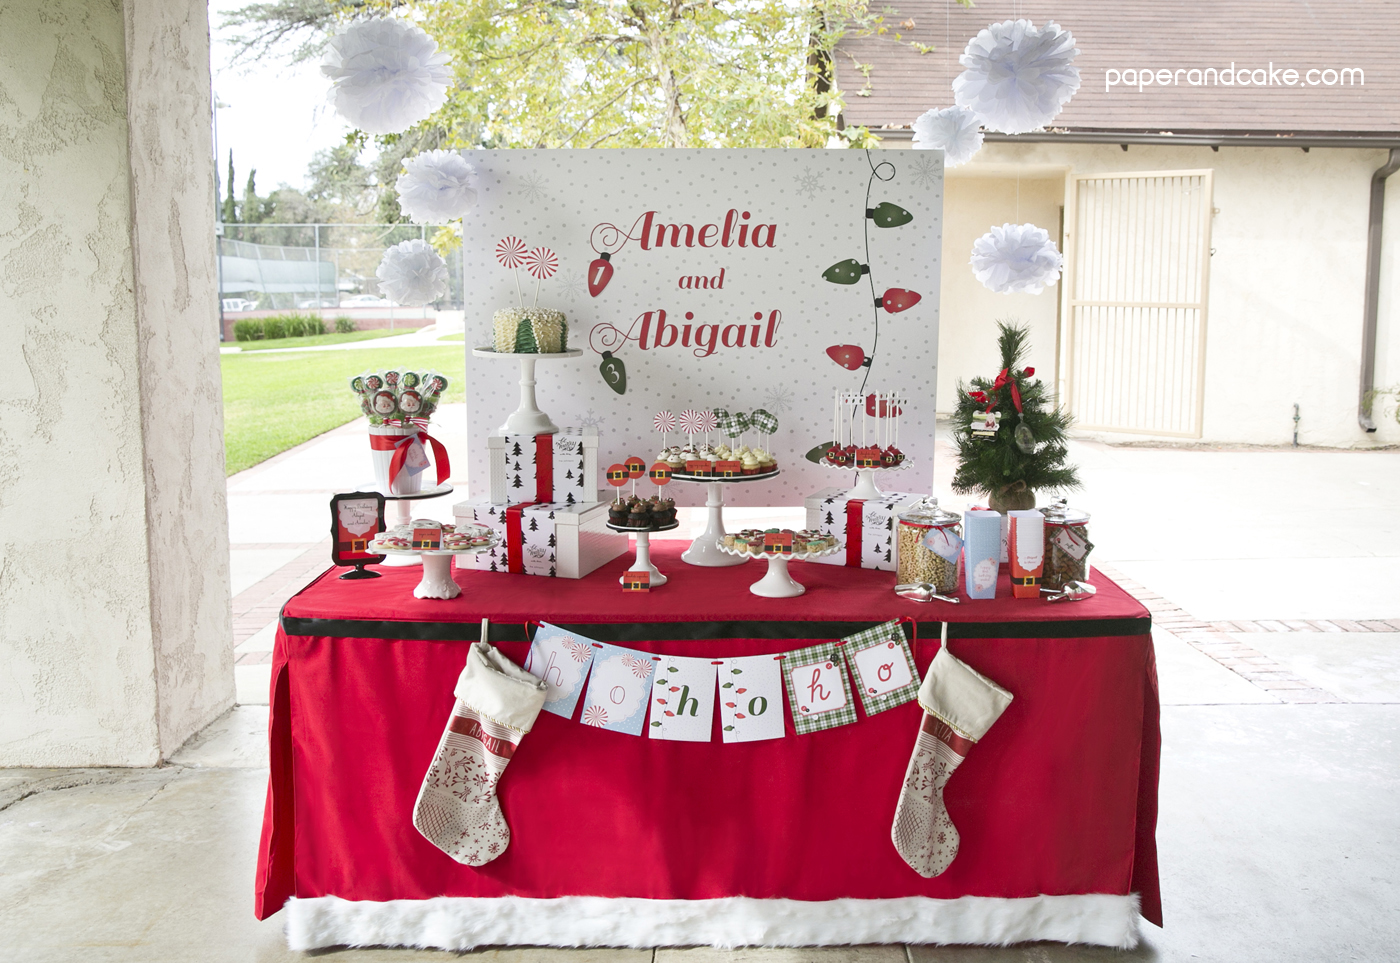 Peppermint and Plaid Party Backdrop Banner